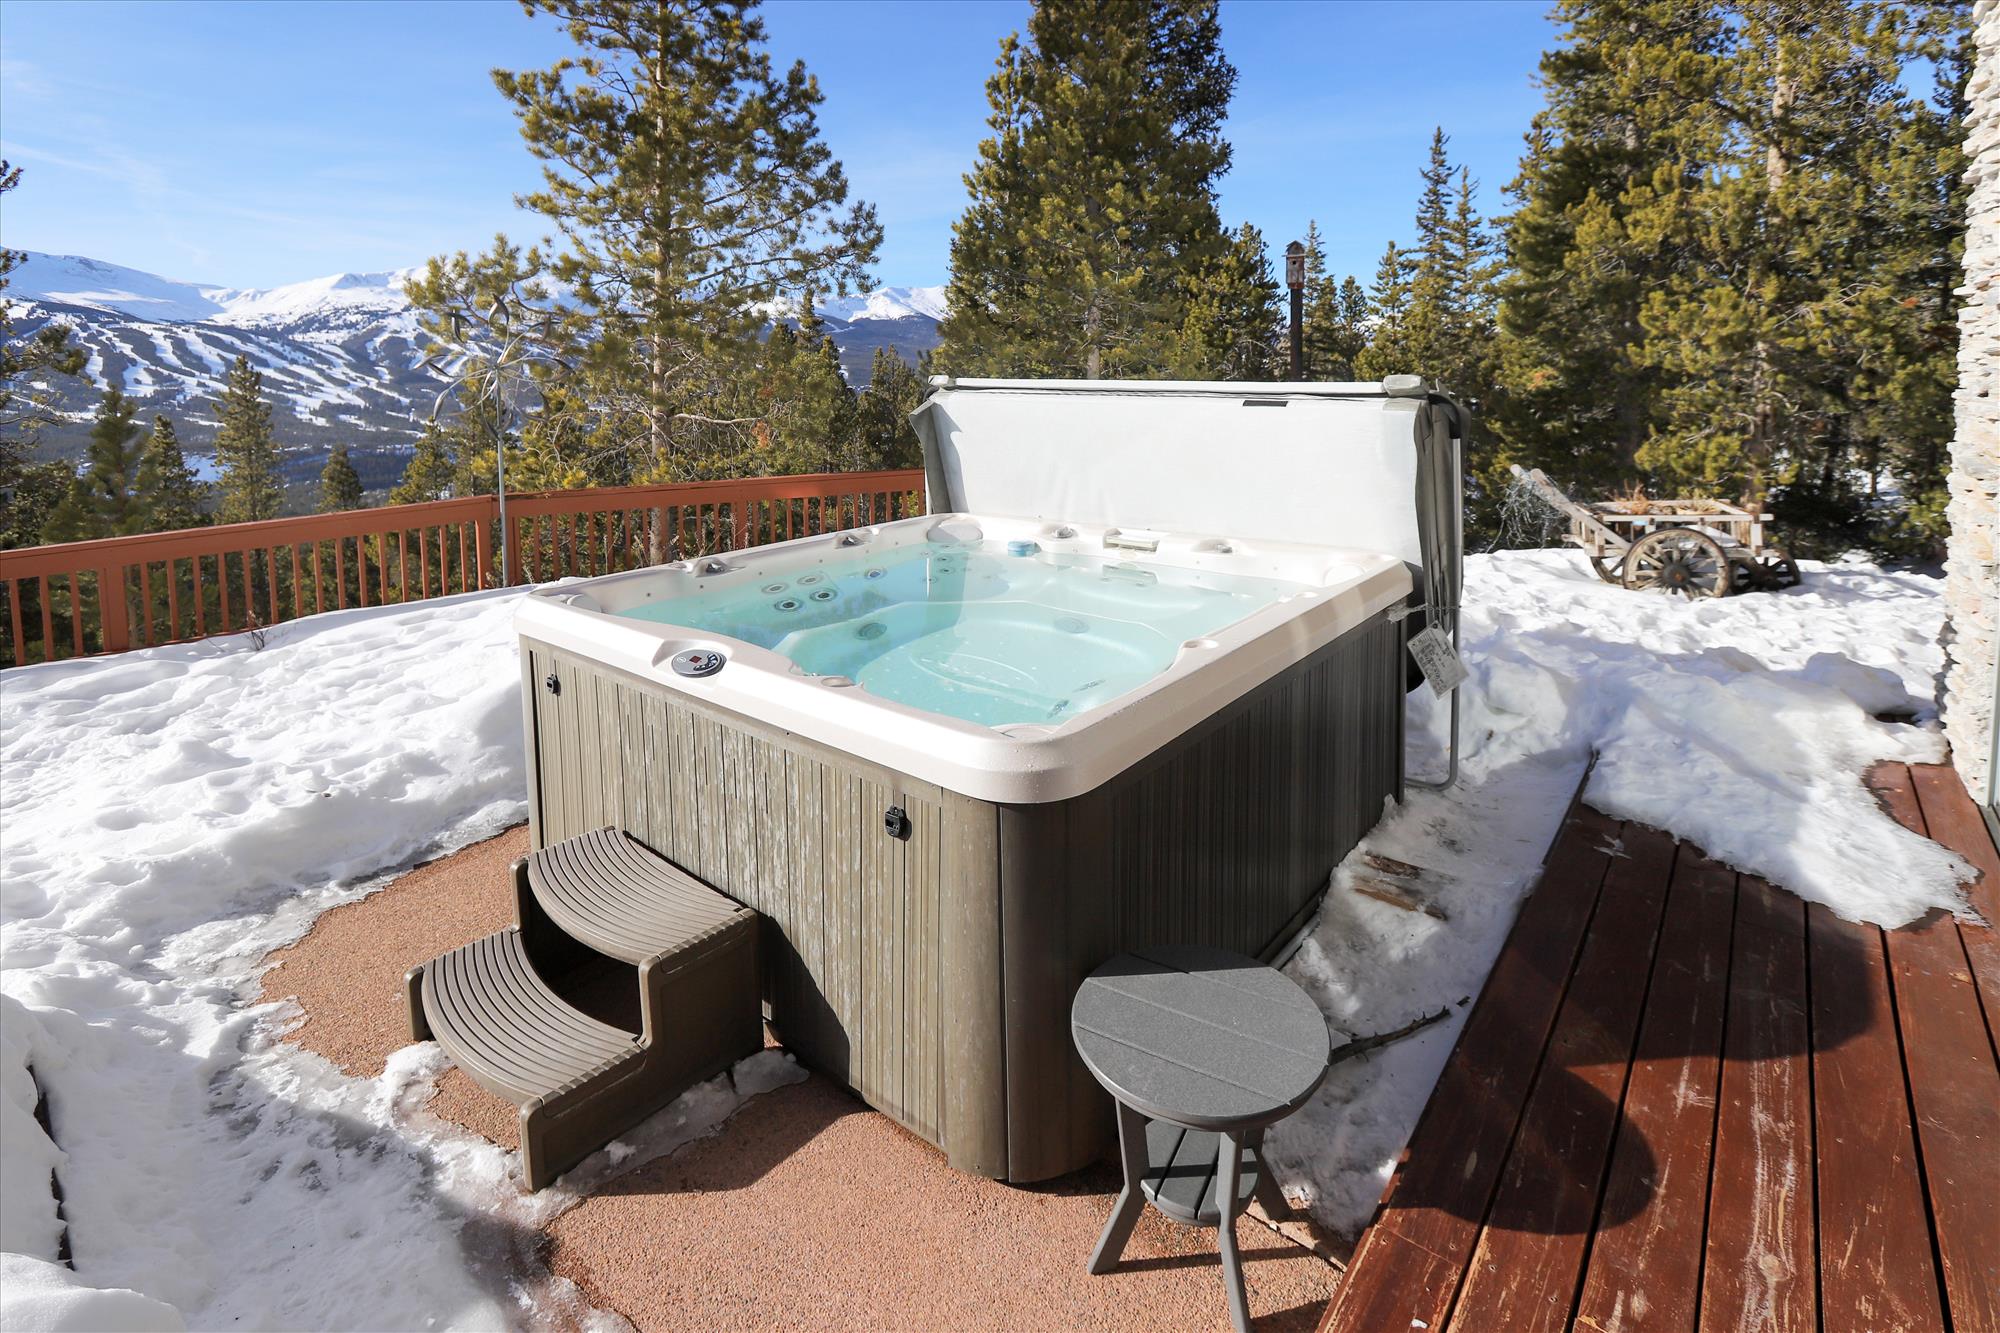 Take in the mountain views as you relax in the hot tub.